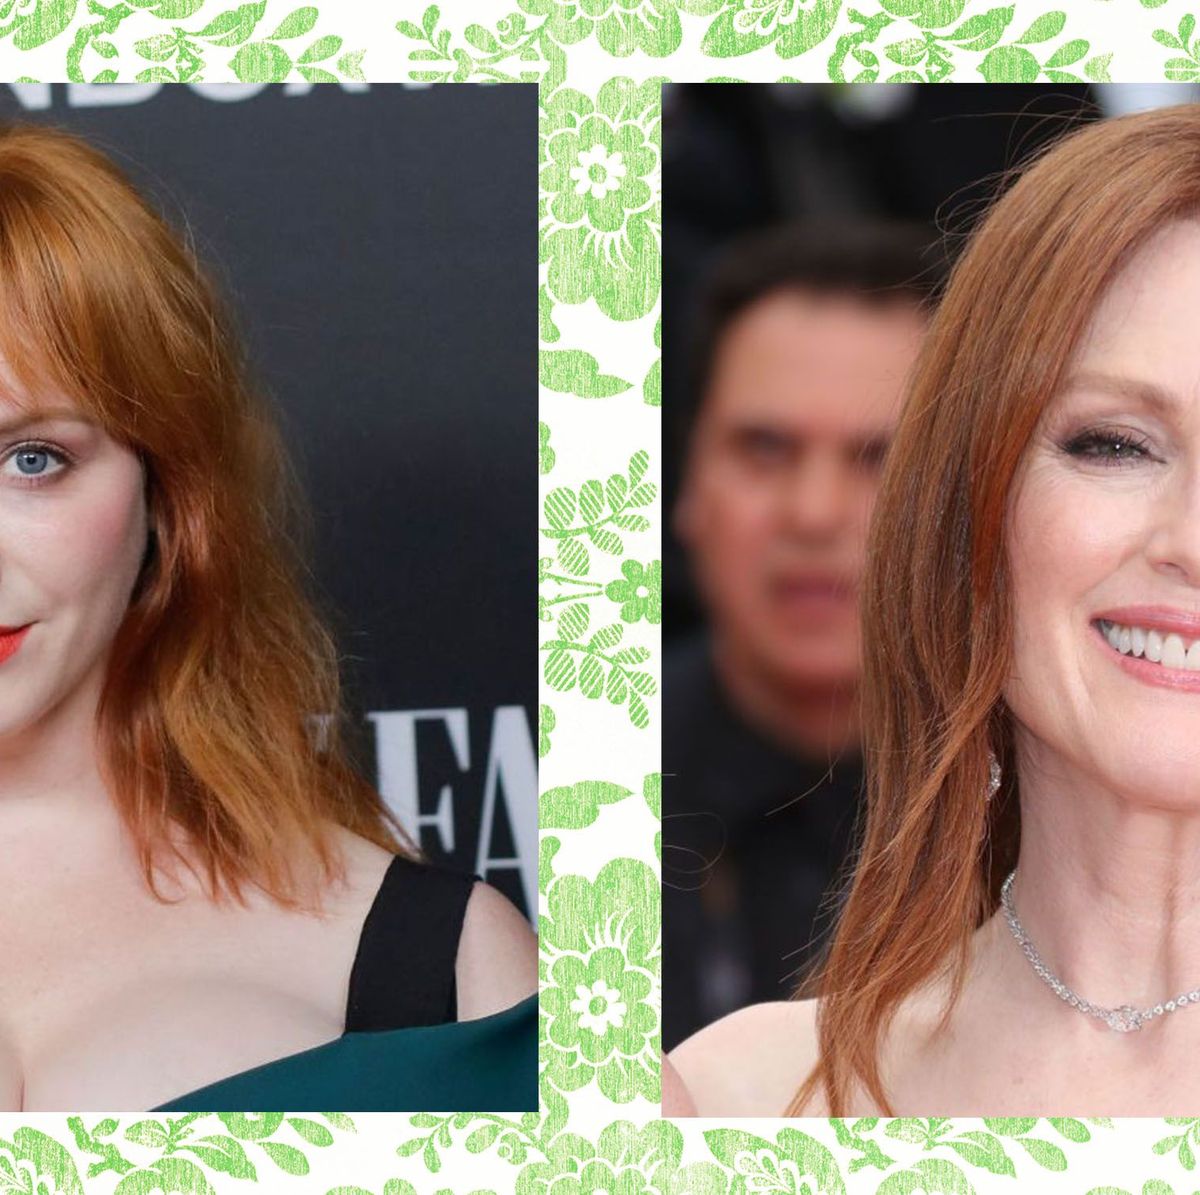 40 Best Red Hair Color Ideas in 2023 - Most Popular Red Hairstyles From  Celebrities